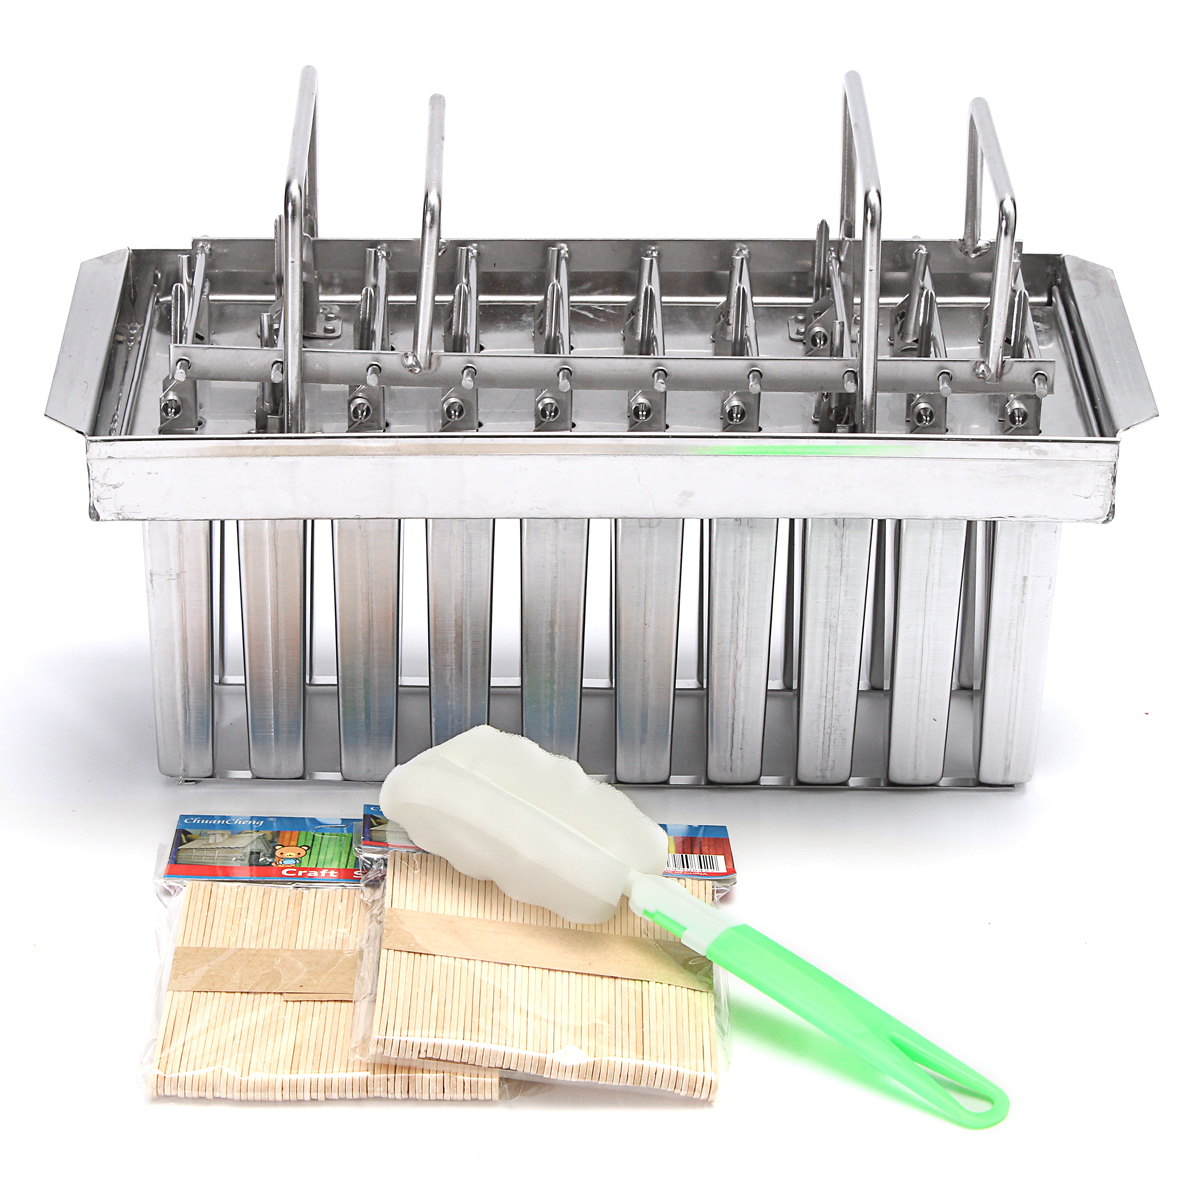 V-type-Stainless-Steel-Mould-20-Cavity-83g-Ice-Pop-Maker-Mold-DIY-Ice-Cream-Lolly-Popsicle-Stick-1339665